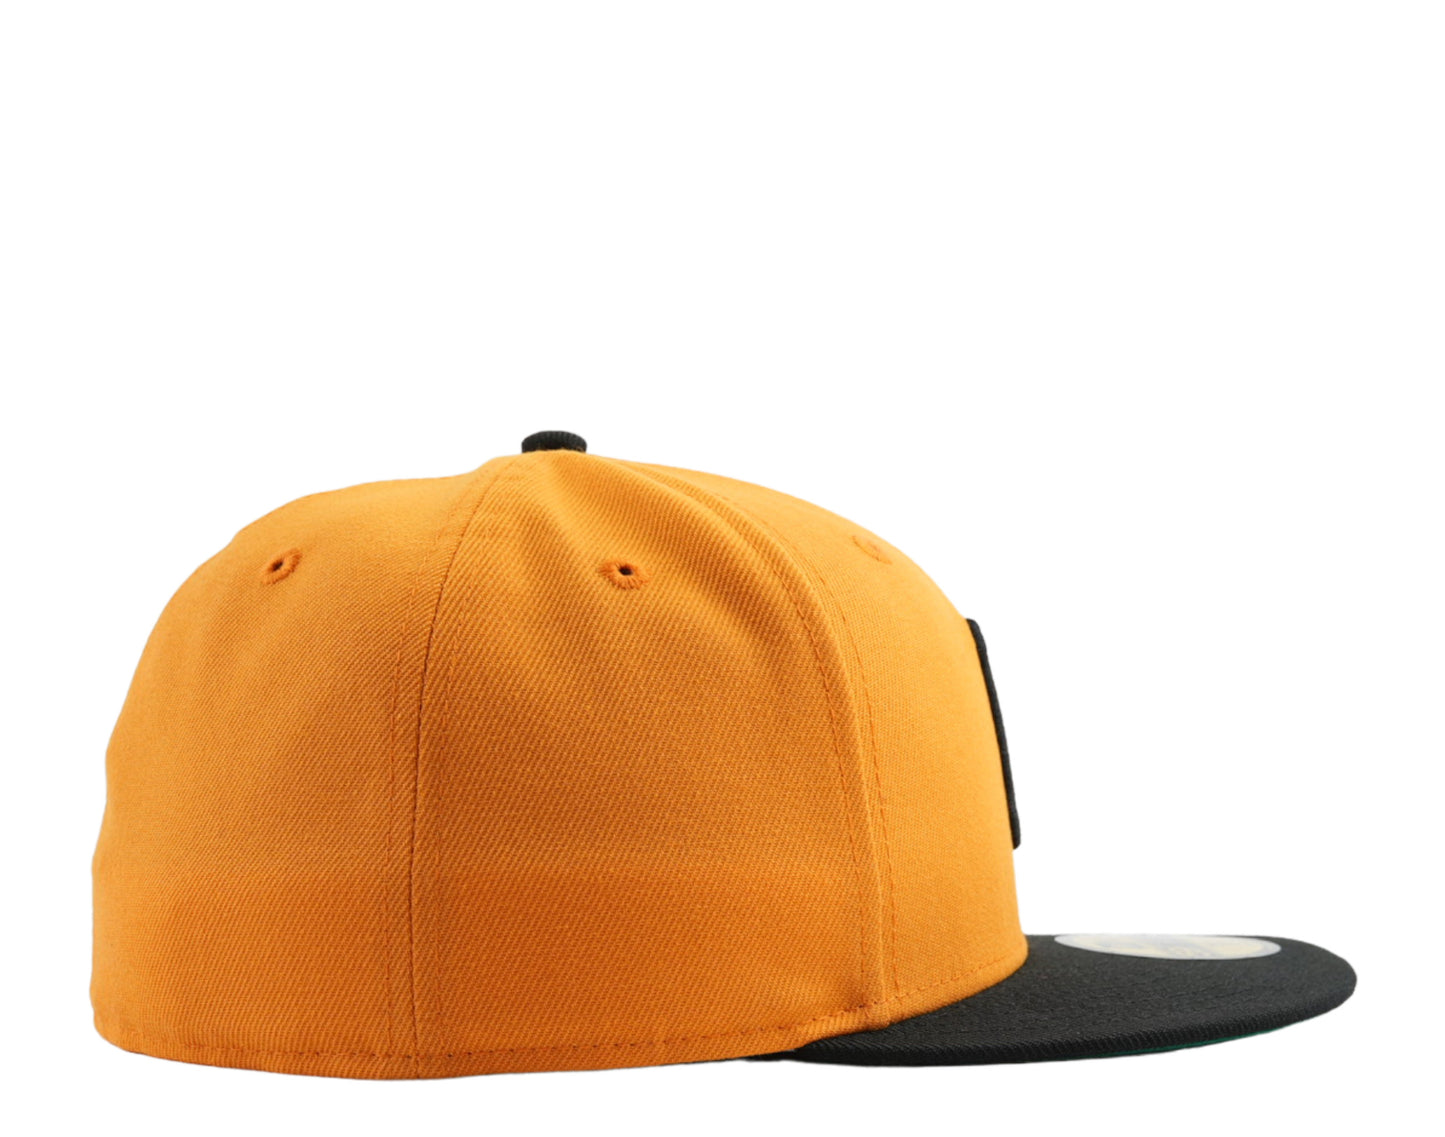 Sold at Auction: Pittsburgh Pirates 1971-75 Game Worn Pro Model Cap